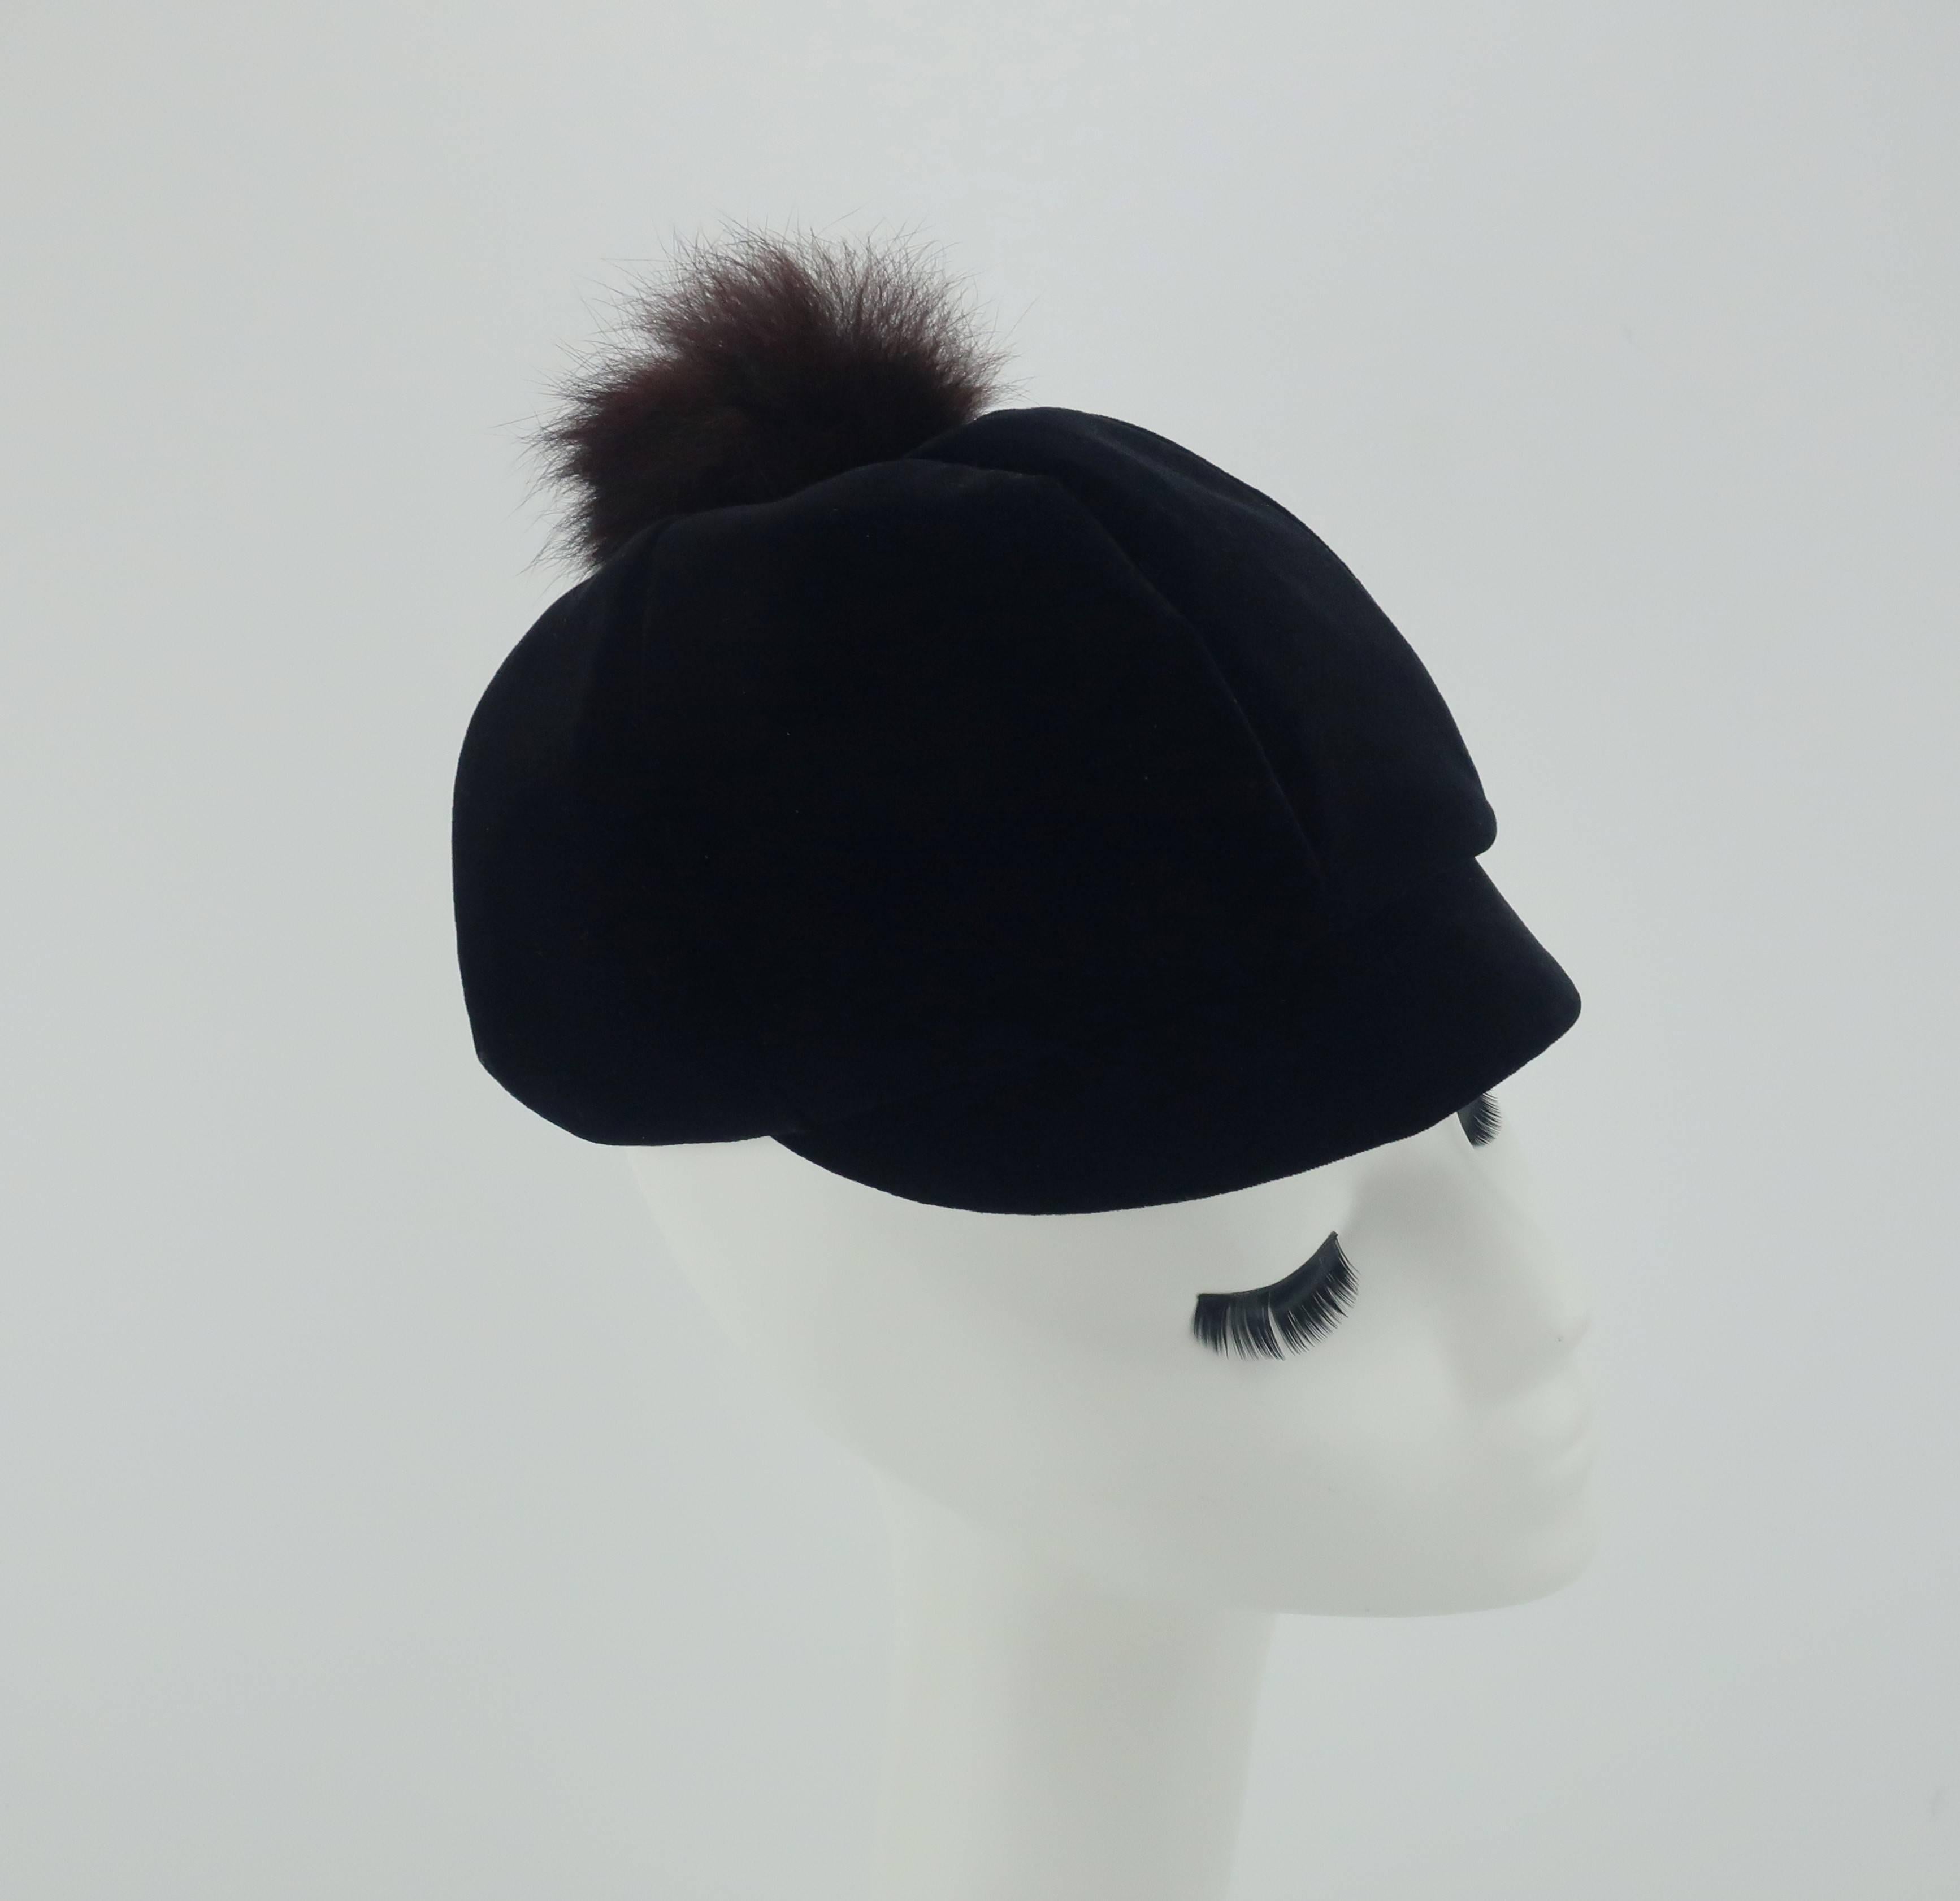 This black velvet cap is a 1960's period perfect silhouette for a mod style.  The skull hugging cap has a short brim and a whimsical dark brown fur pom at the center crown.  The style provides a little warmth and a whole lotta look!  Excellent